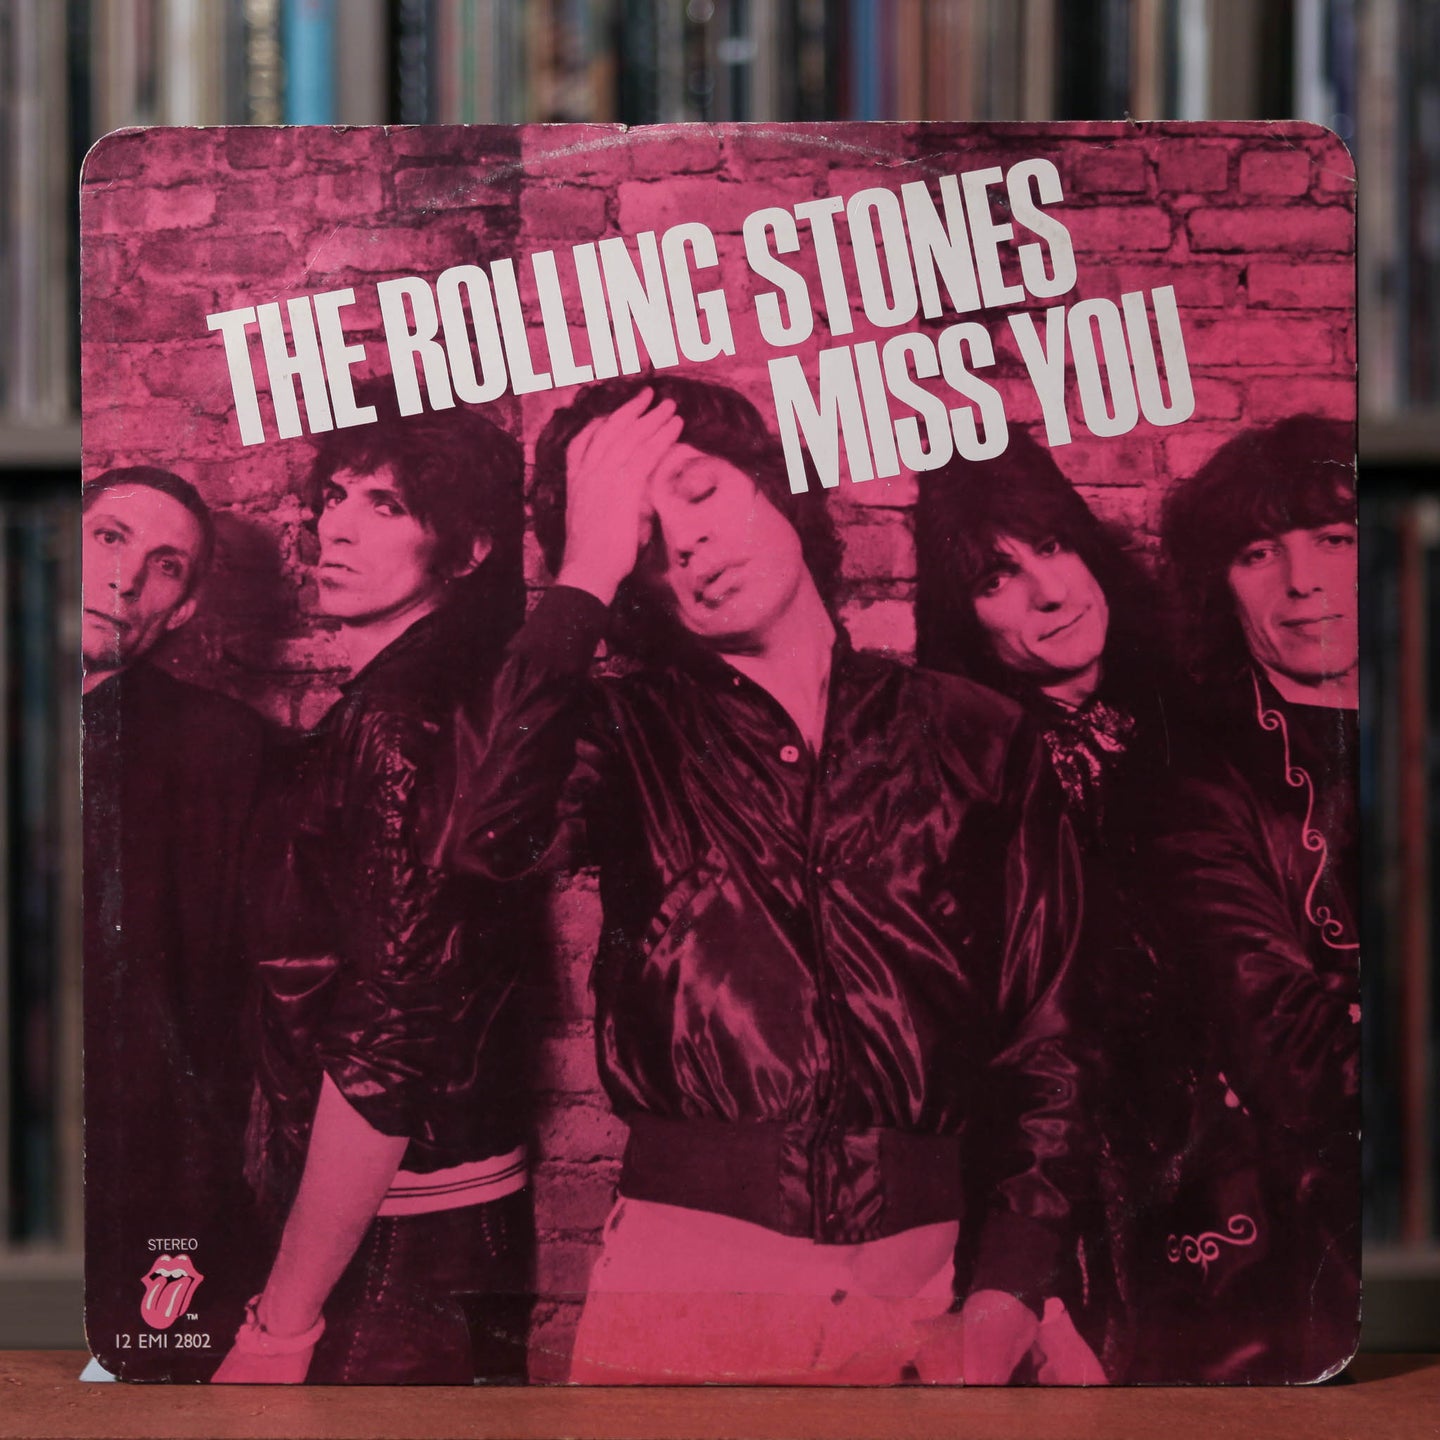 Rolling Stones - Miss You - 12